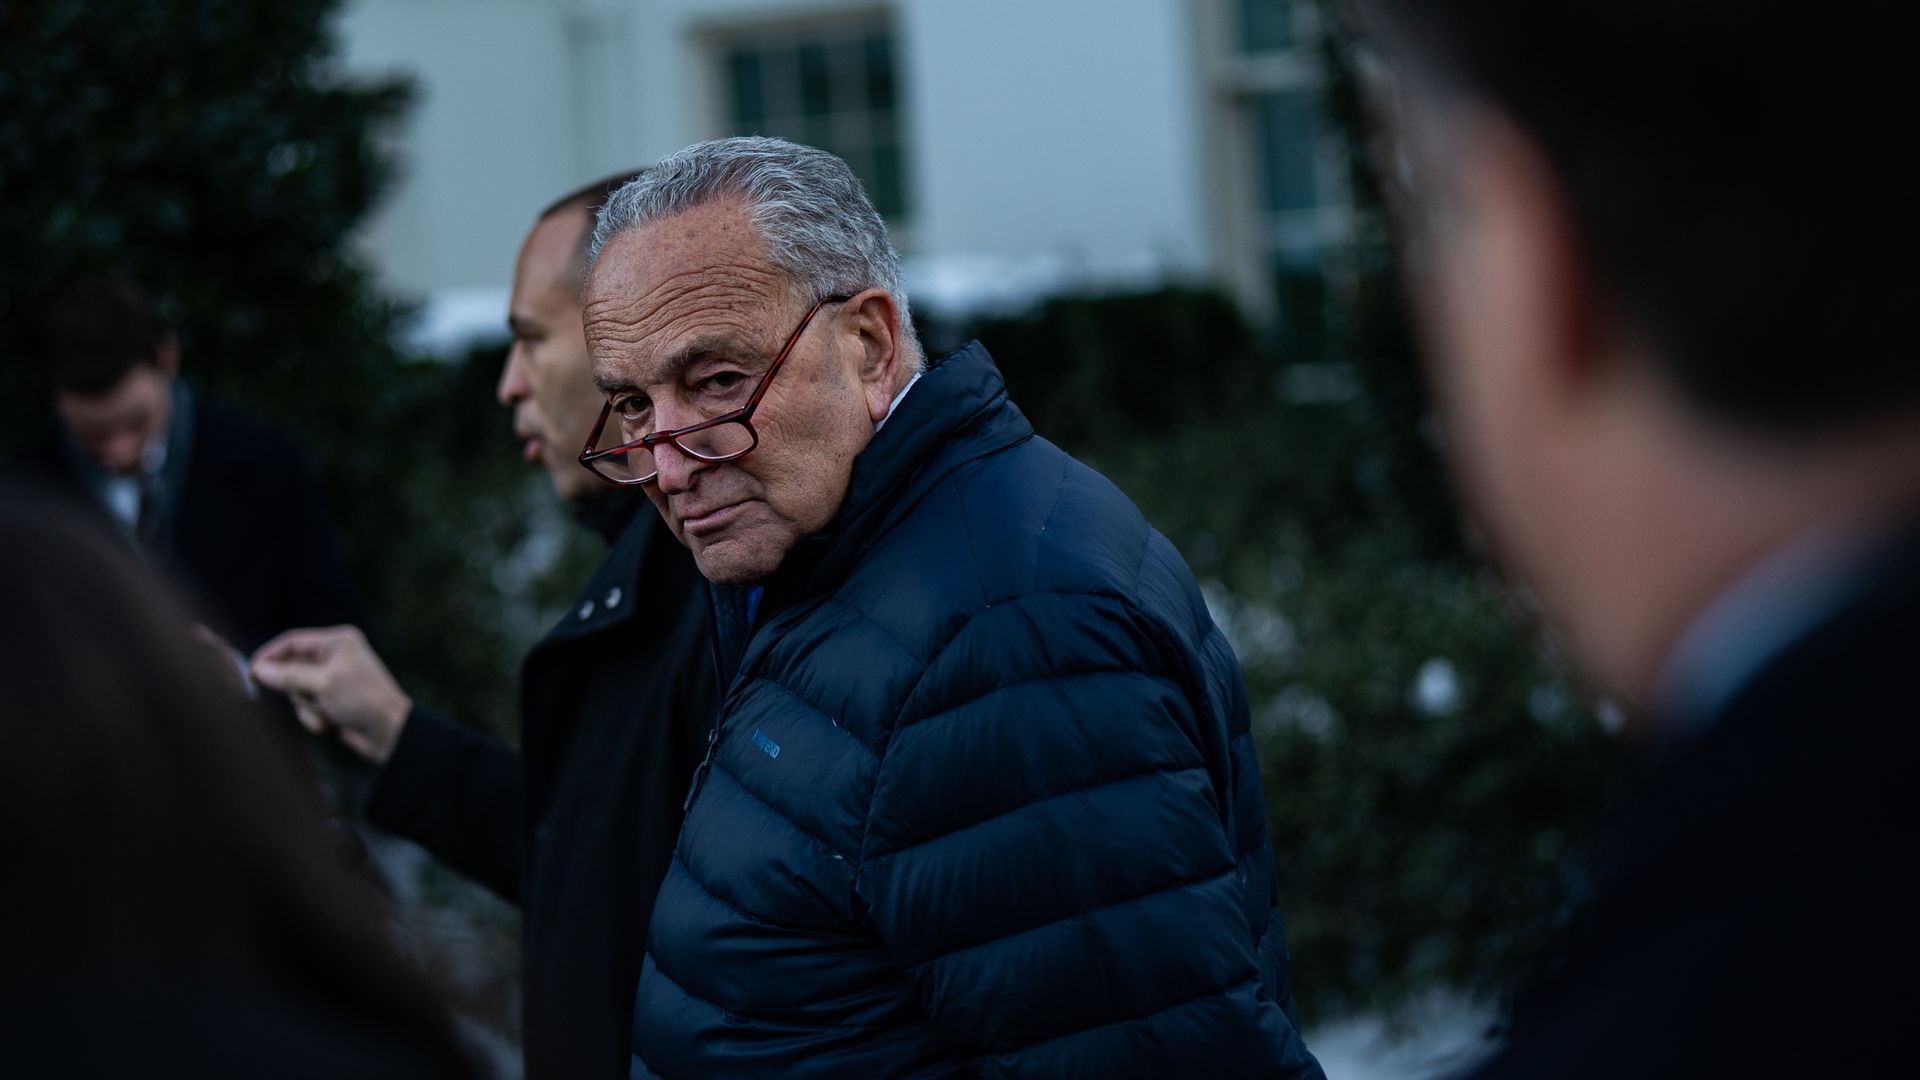 Senate Majority Leader Chuck Schumer, wearing glasses and a puffy jacket.